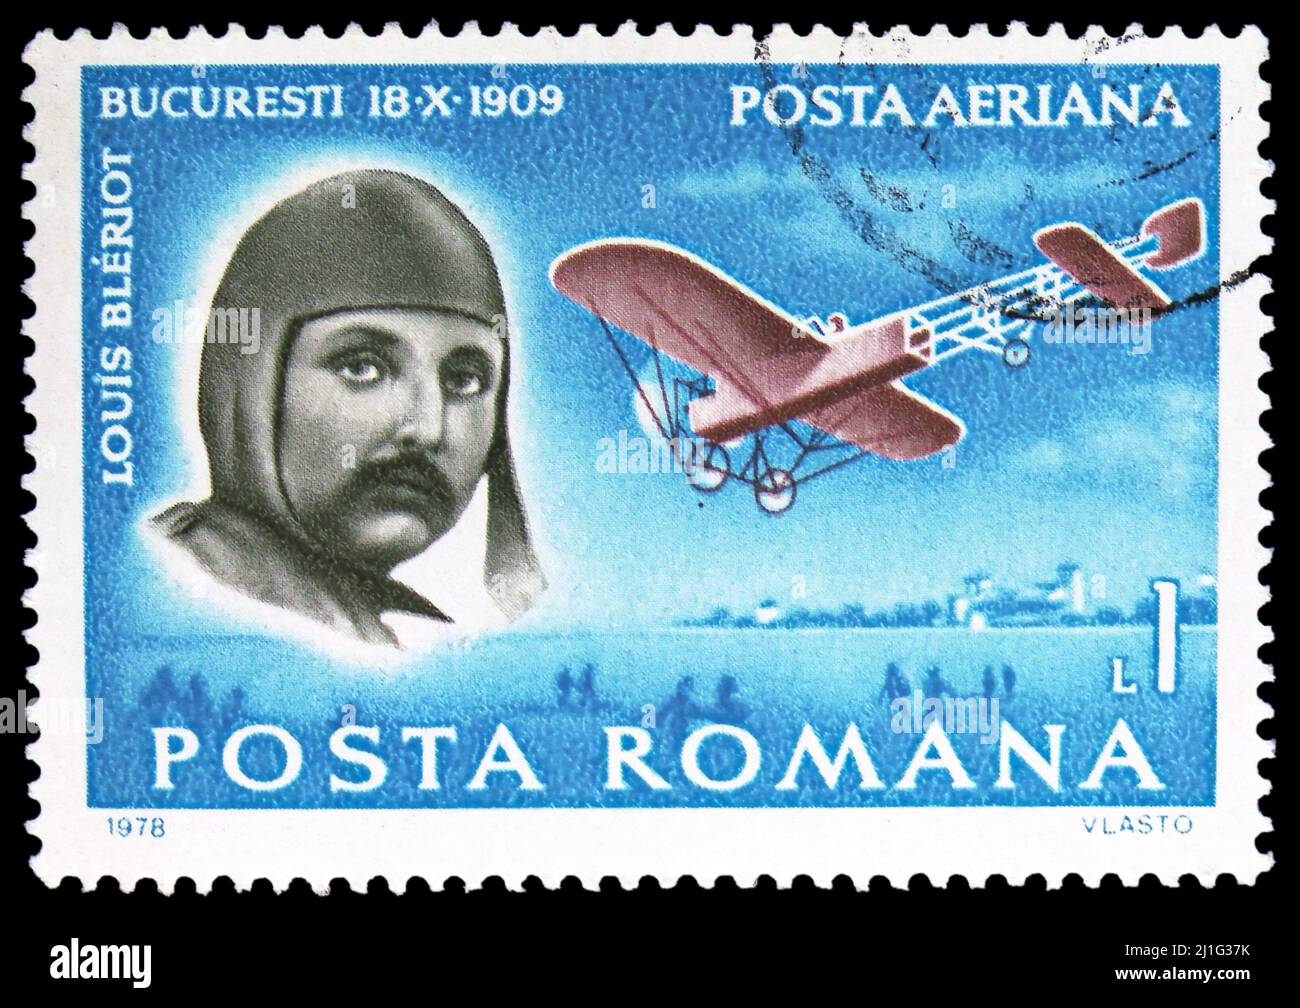 MOSCOW, RUSSIA - MARCH 10, 2022: Postage stamp printed in Romania shows Louis Bleriot (1909), Pioneers of Aviation serie, circa 1978 Stock Photo